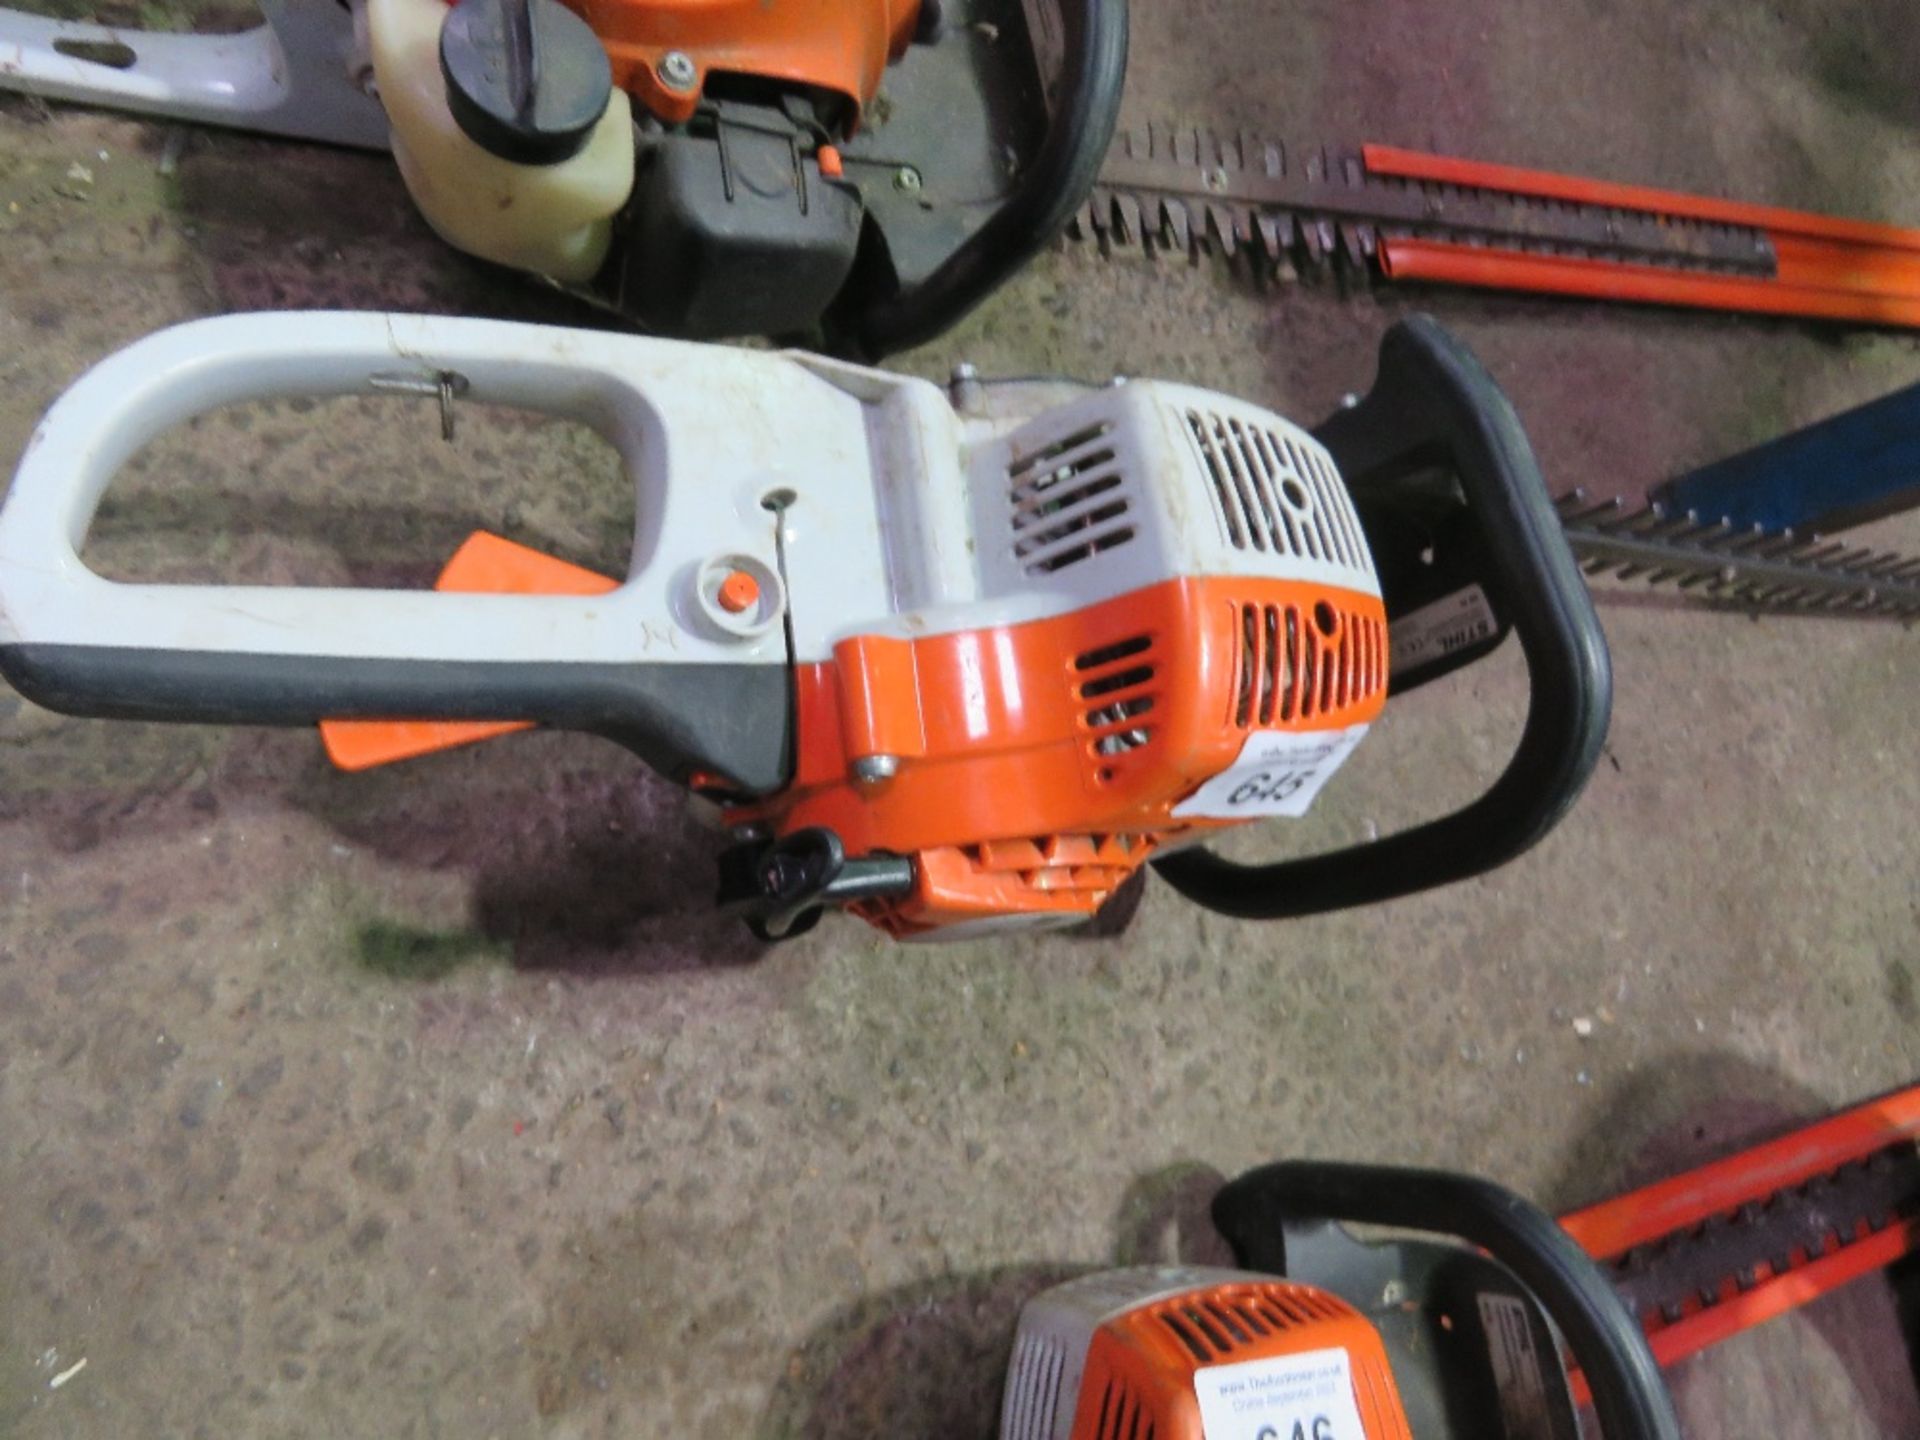 STIHL HS45 PETROL ENGINED PROFESSIONAL HEDGE CUTTER. DIRECT FROM LOCAL LANDSCAPE COMPANY WHO ARE CLO - Image 4 of 5